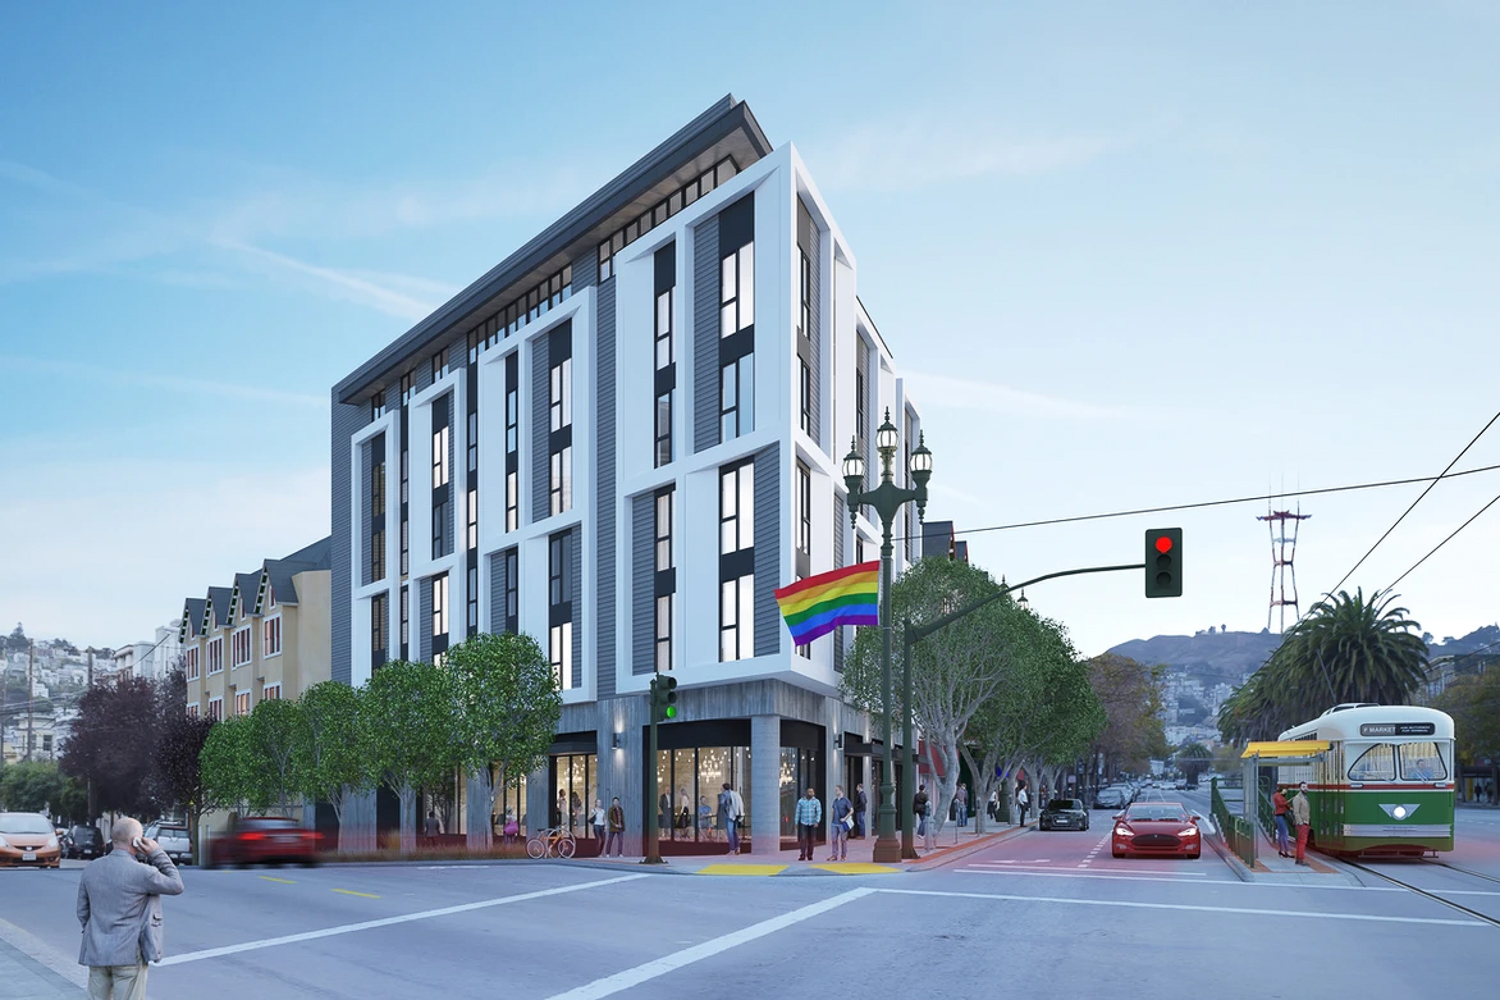 2201 Market Street with Sutro Tower in the background, rendering by Edmonds + Lee Architects